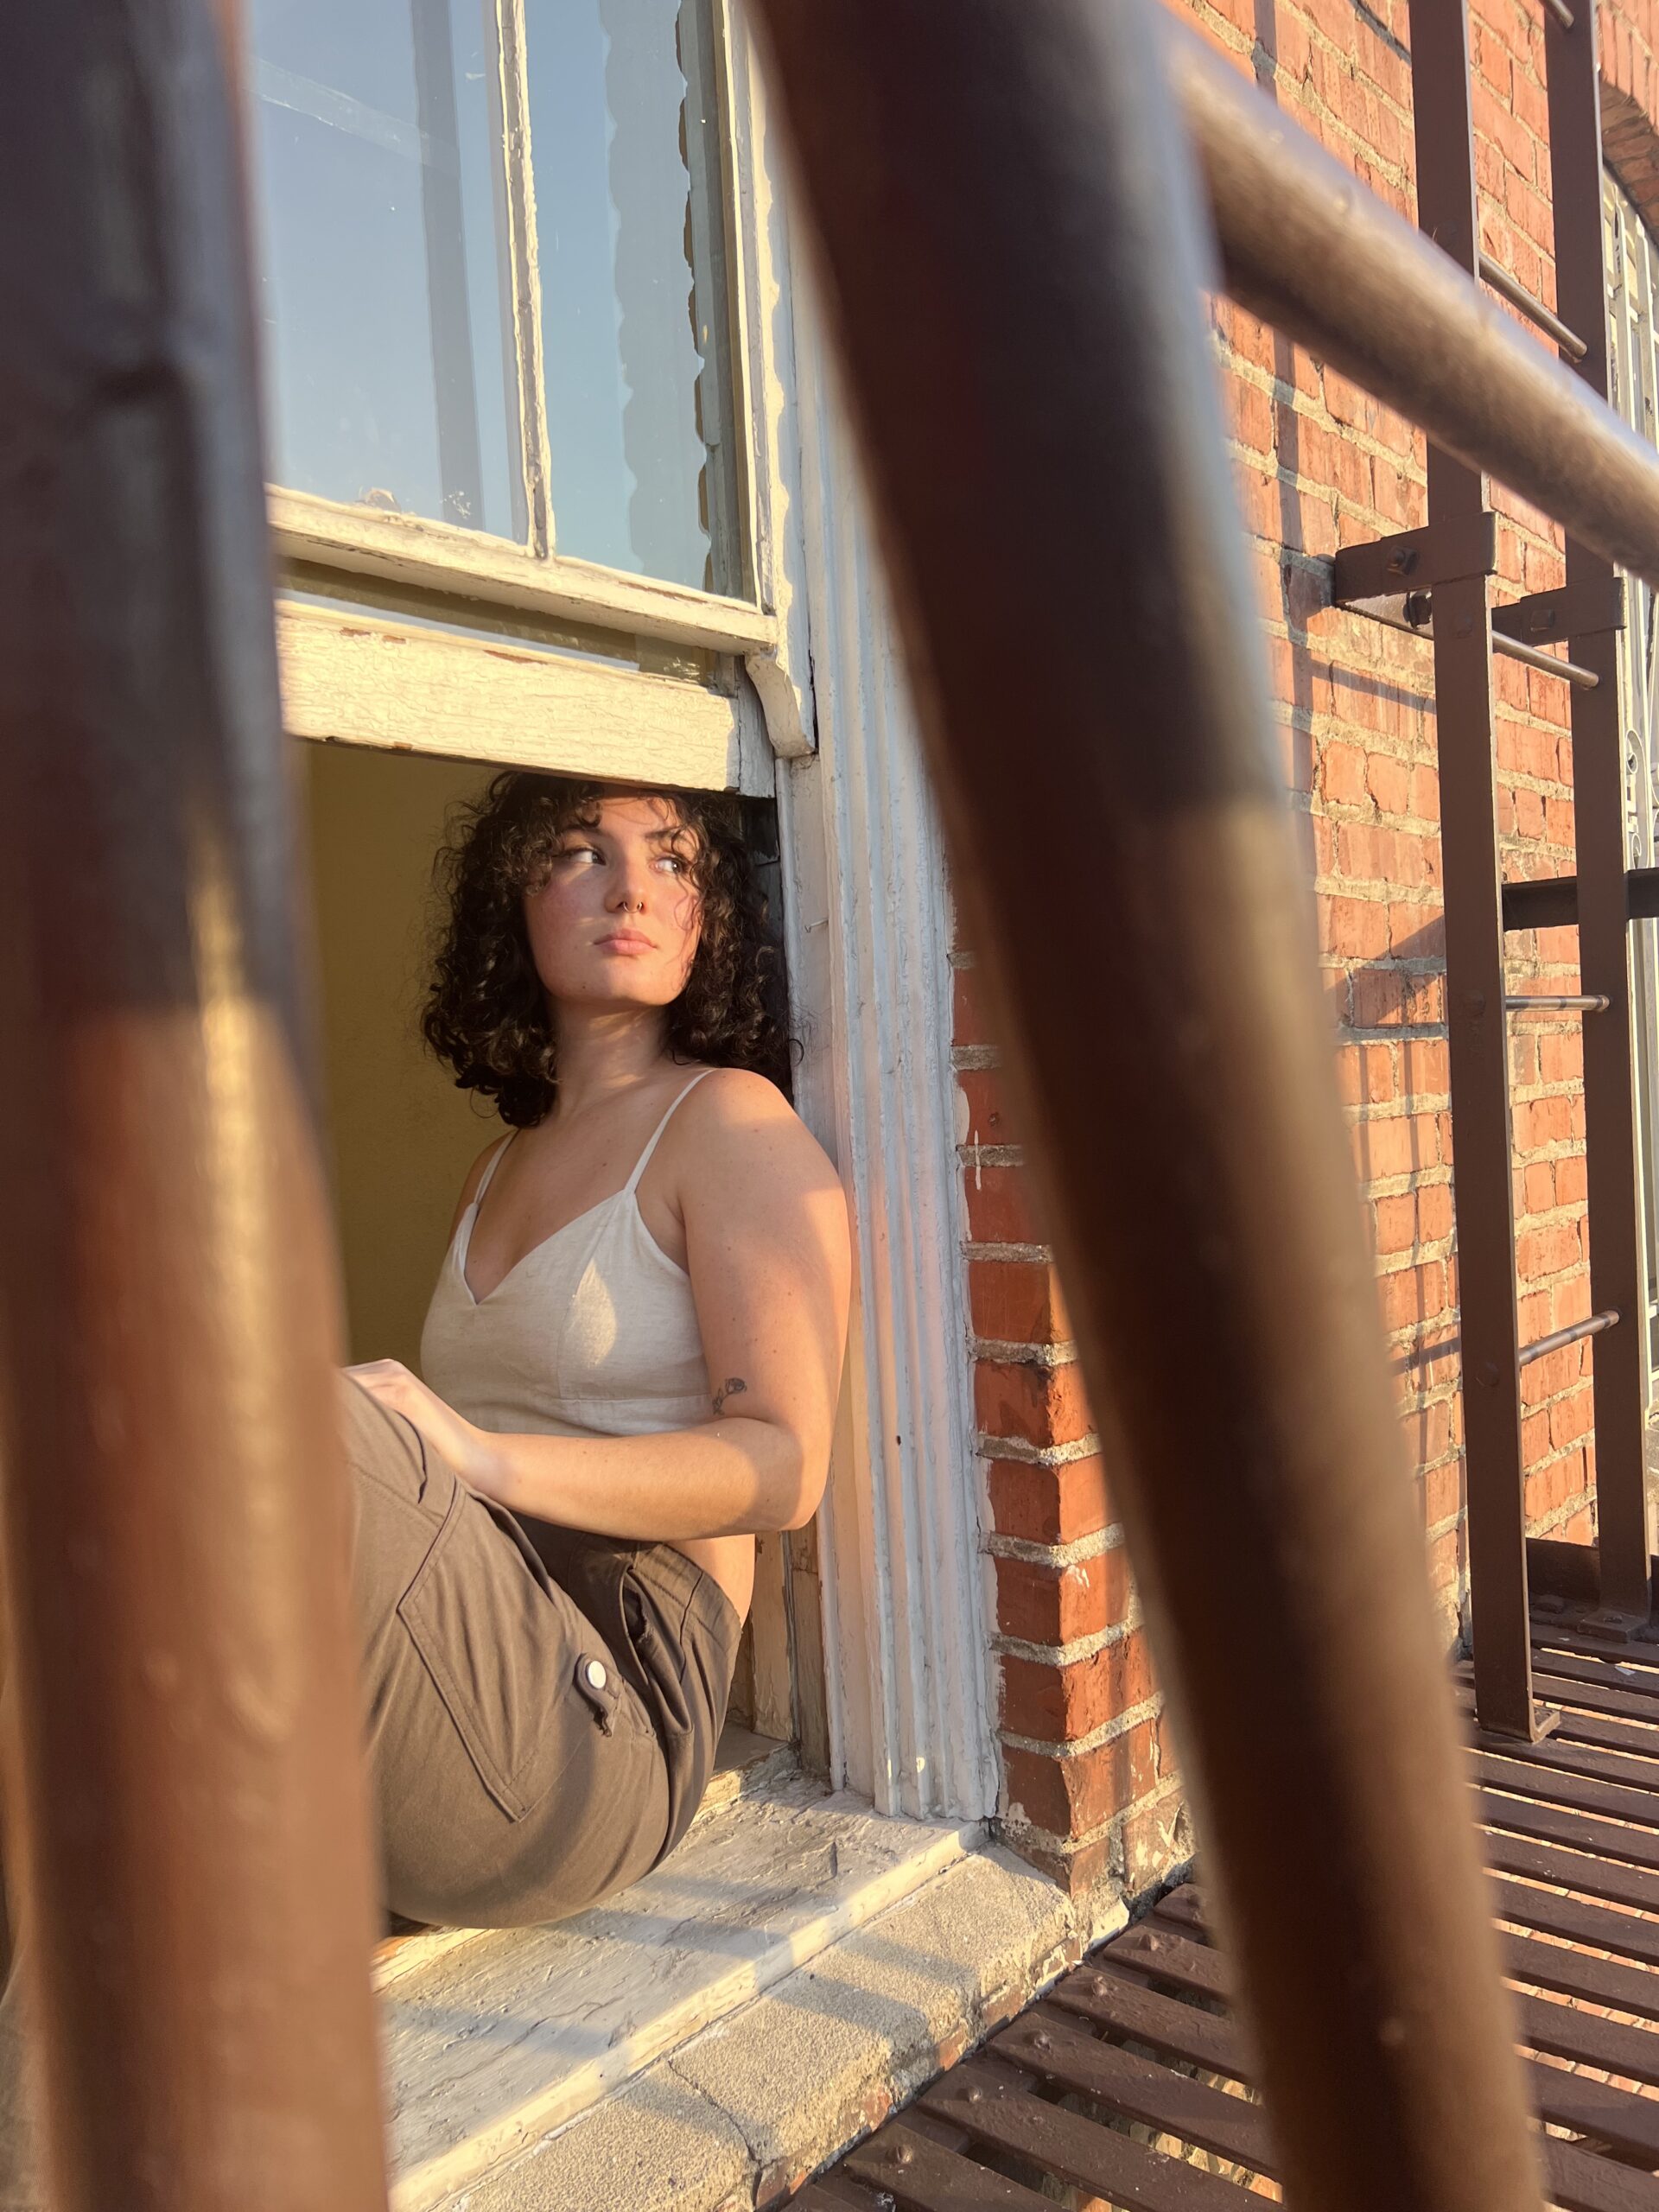 A person of light skin tone and curly dark hair sitting on a window sill by a fire escape and looking into the distance.